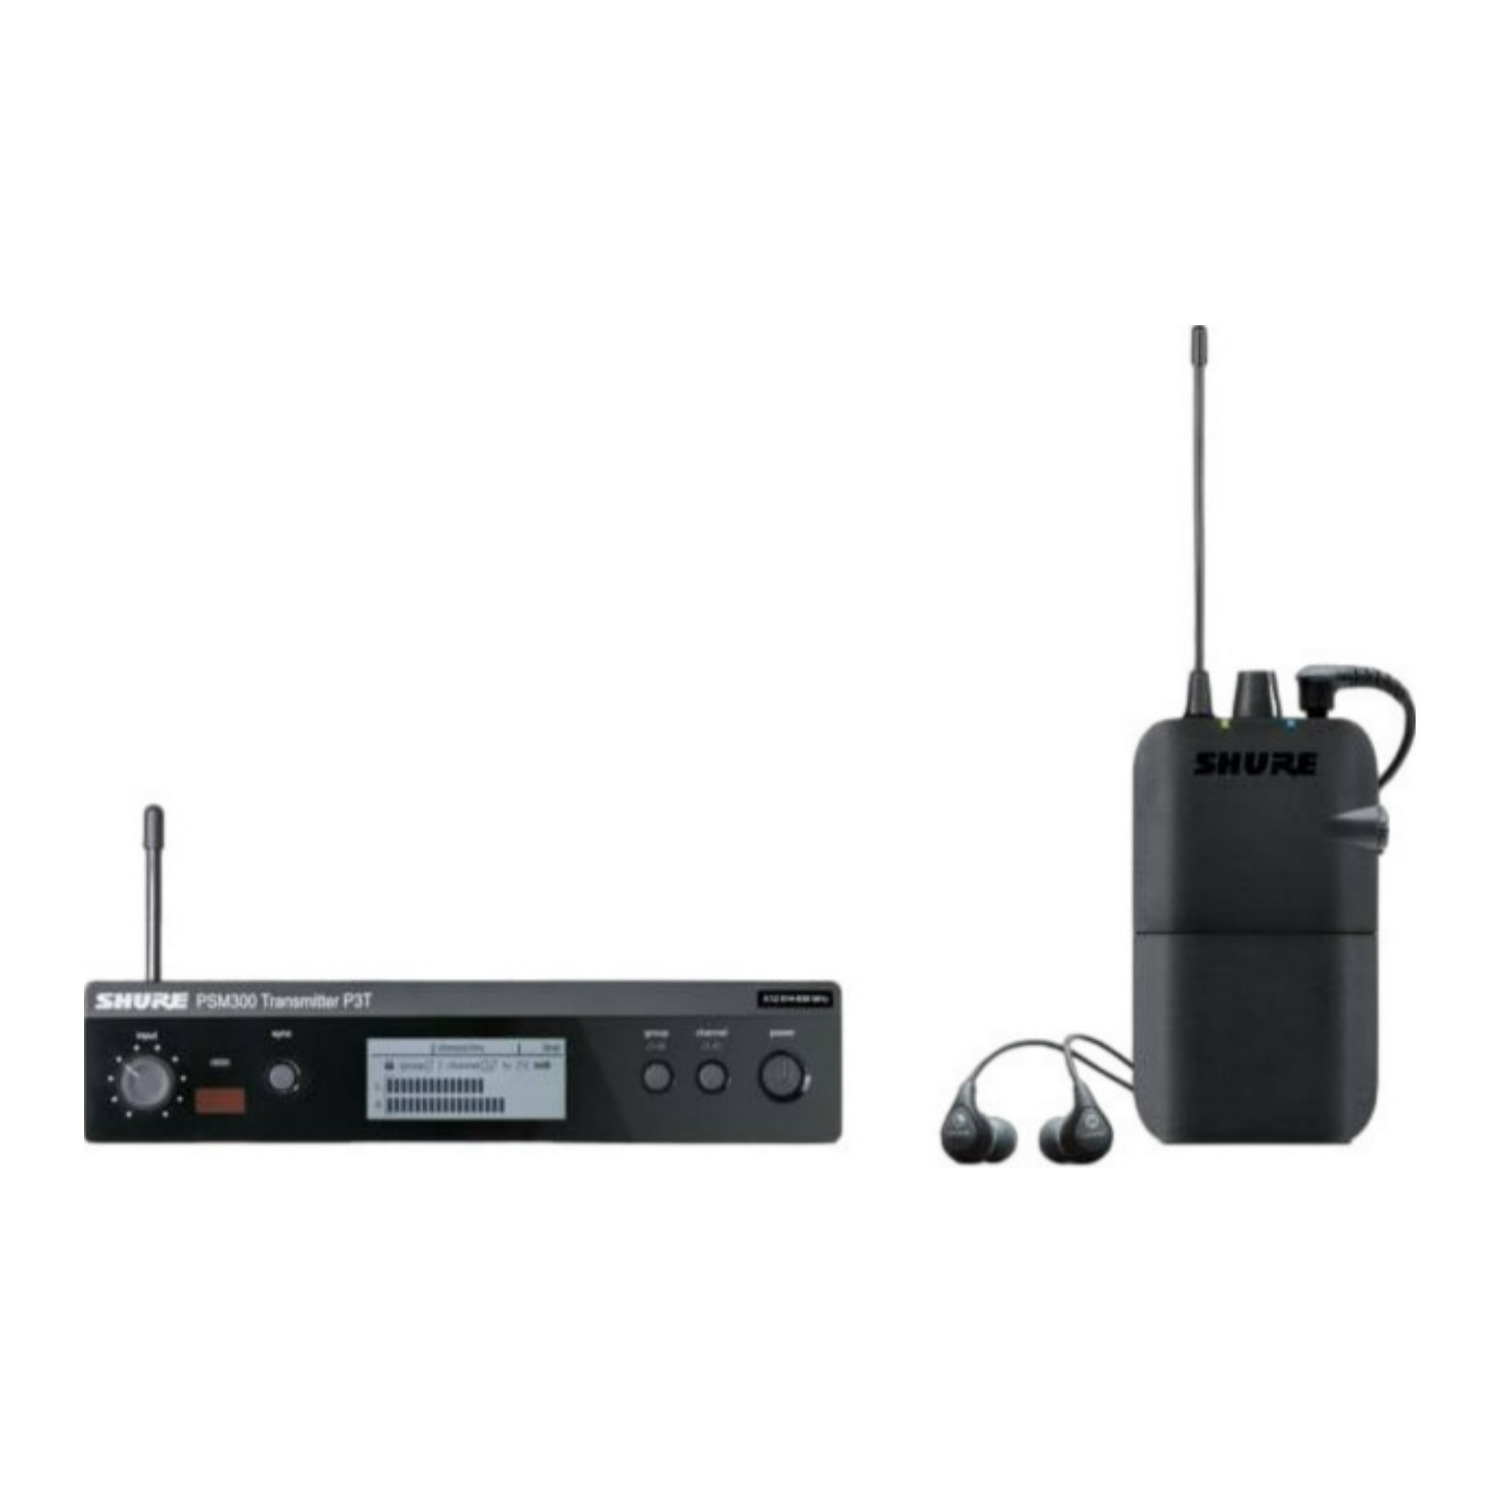 Shure P3TR112GR PSM300 Wireless In-Ear Monitoring System with SE112 Earphones and J13 Band in Black -  P3TR112GR-J13